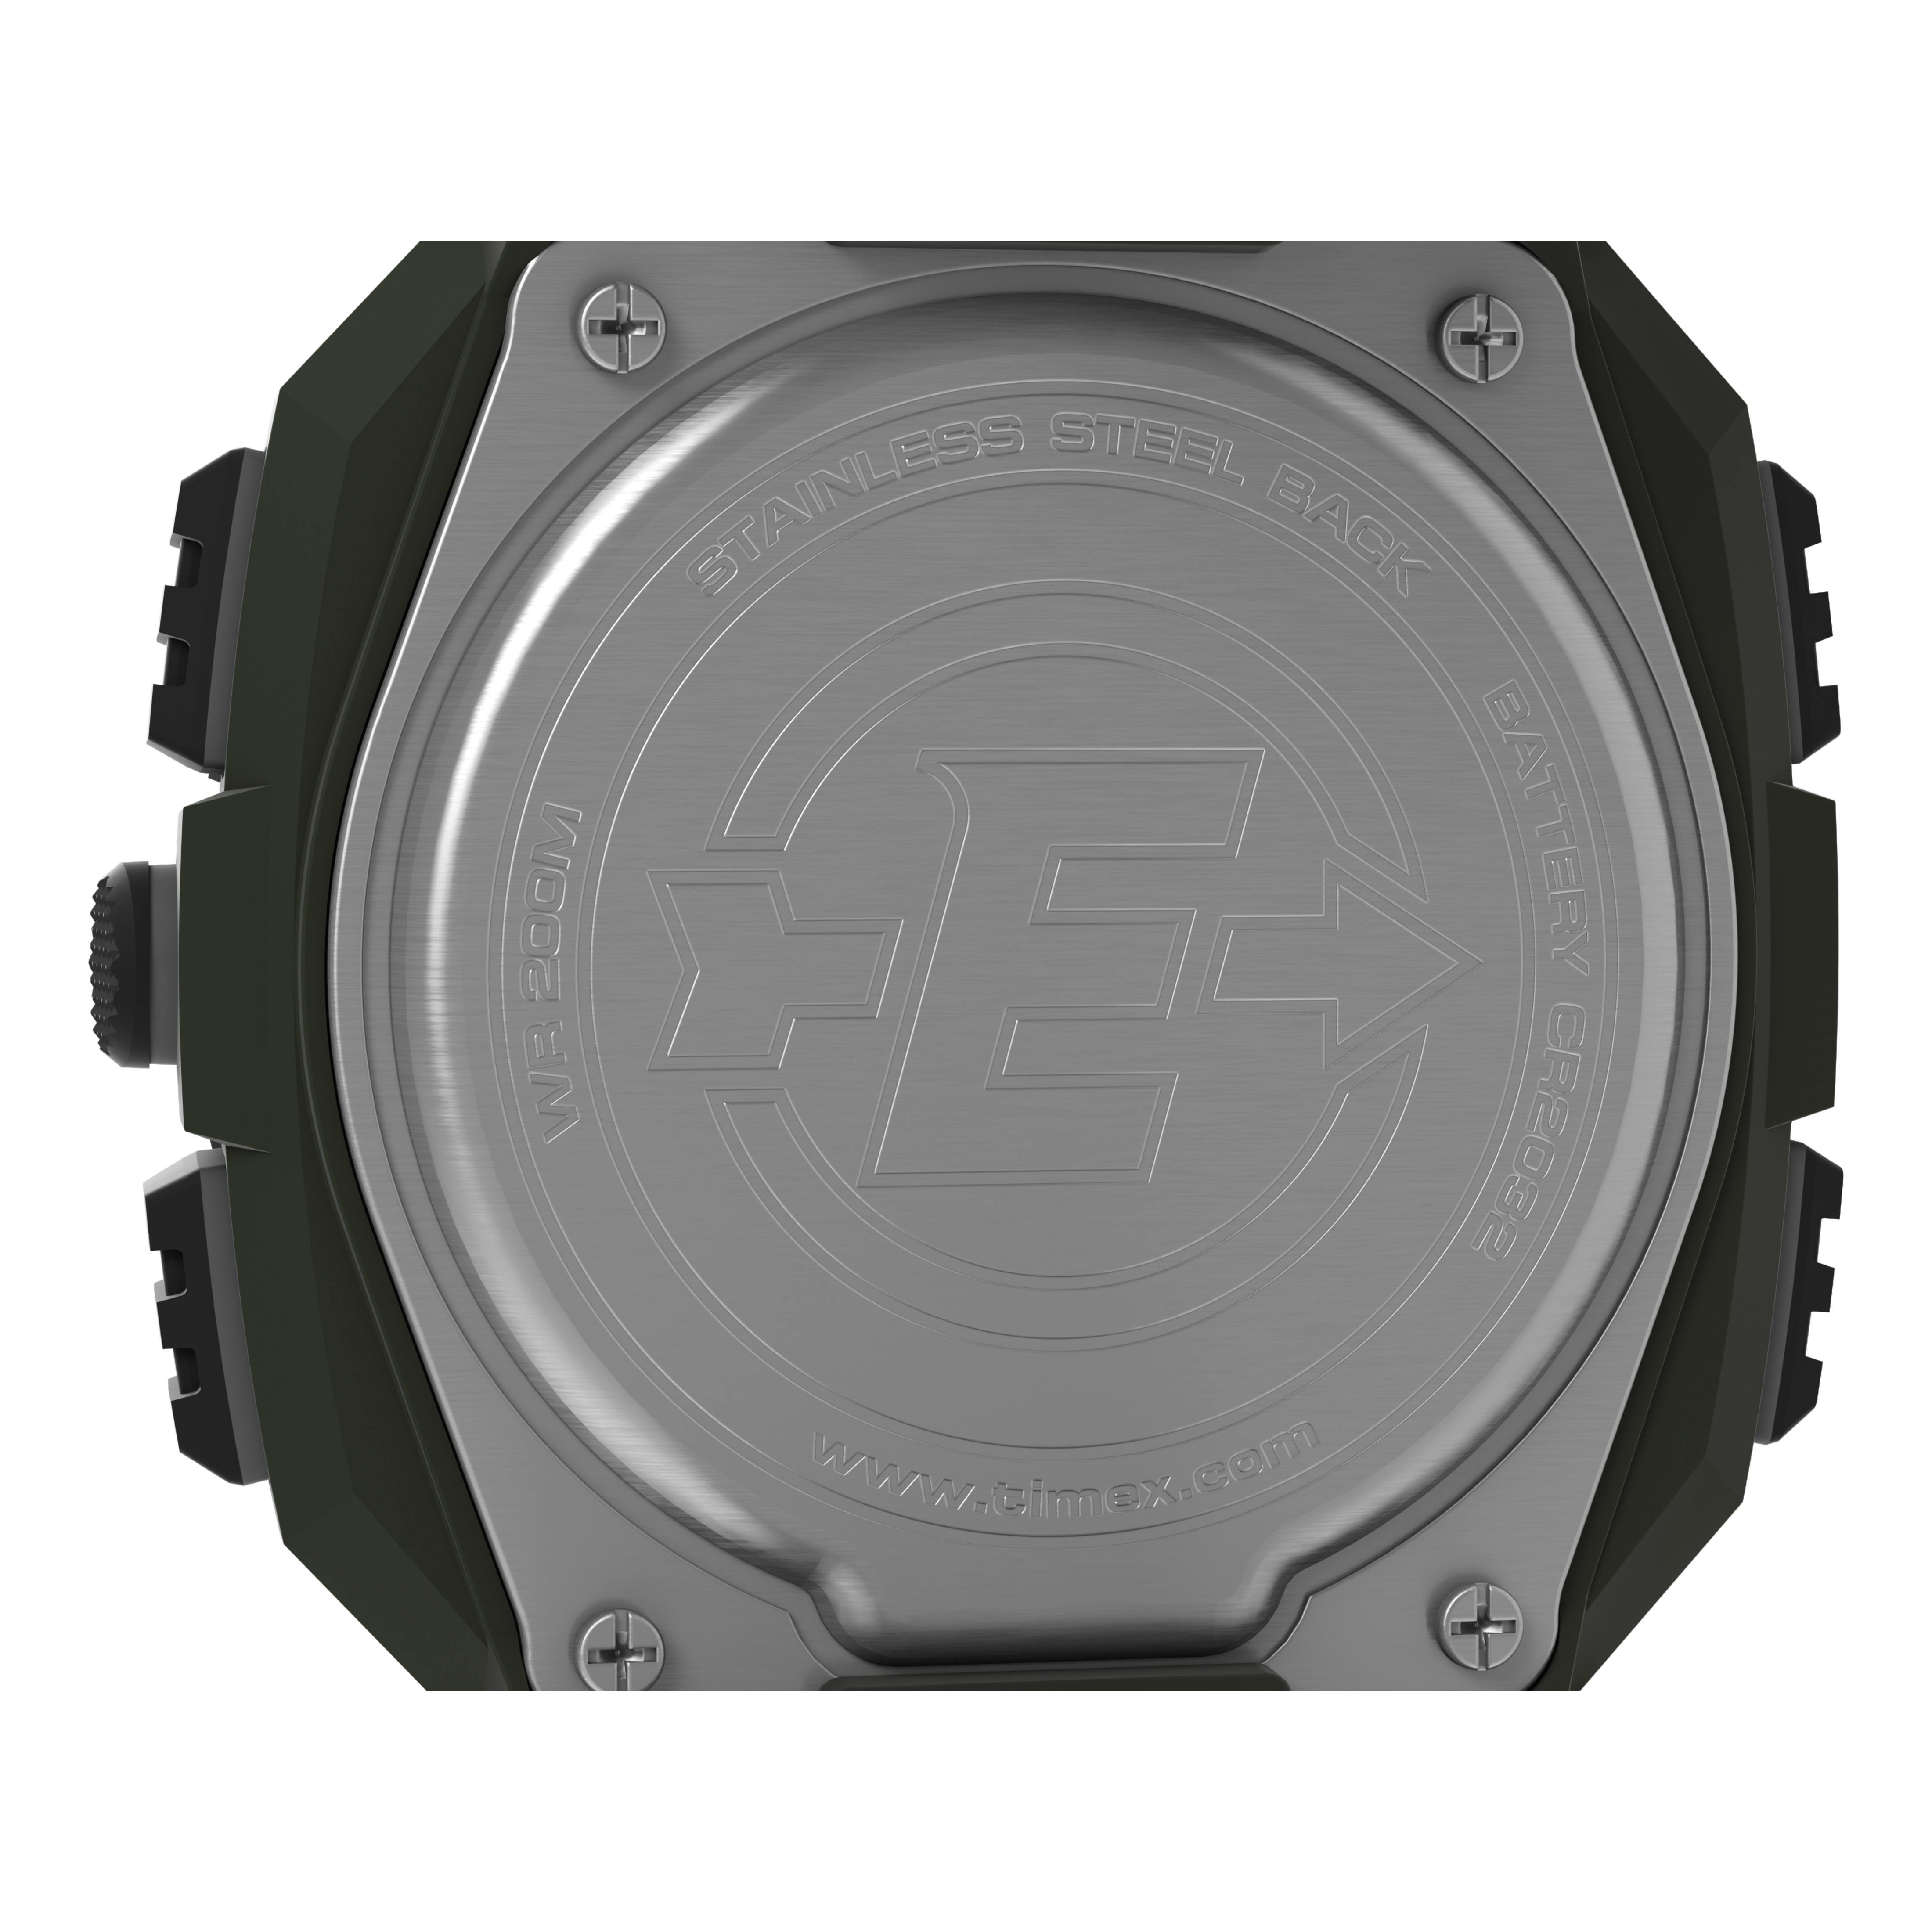 TIMEX® Expedition® Shock XL 50mm Resin Strap Watch